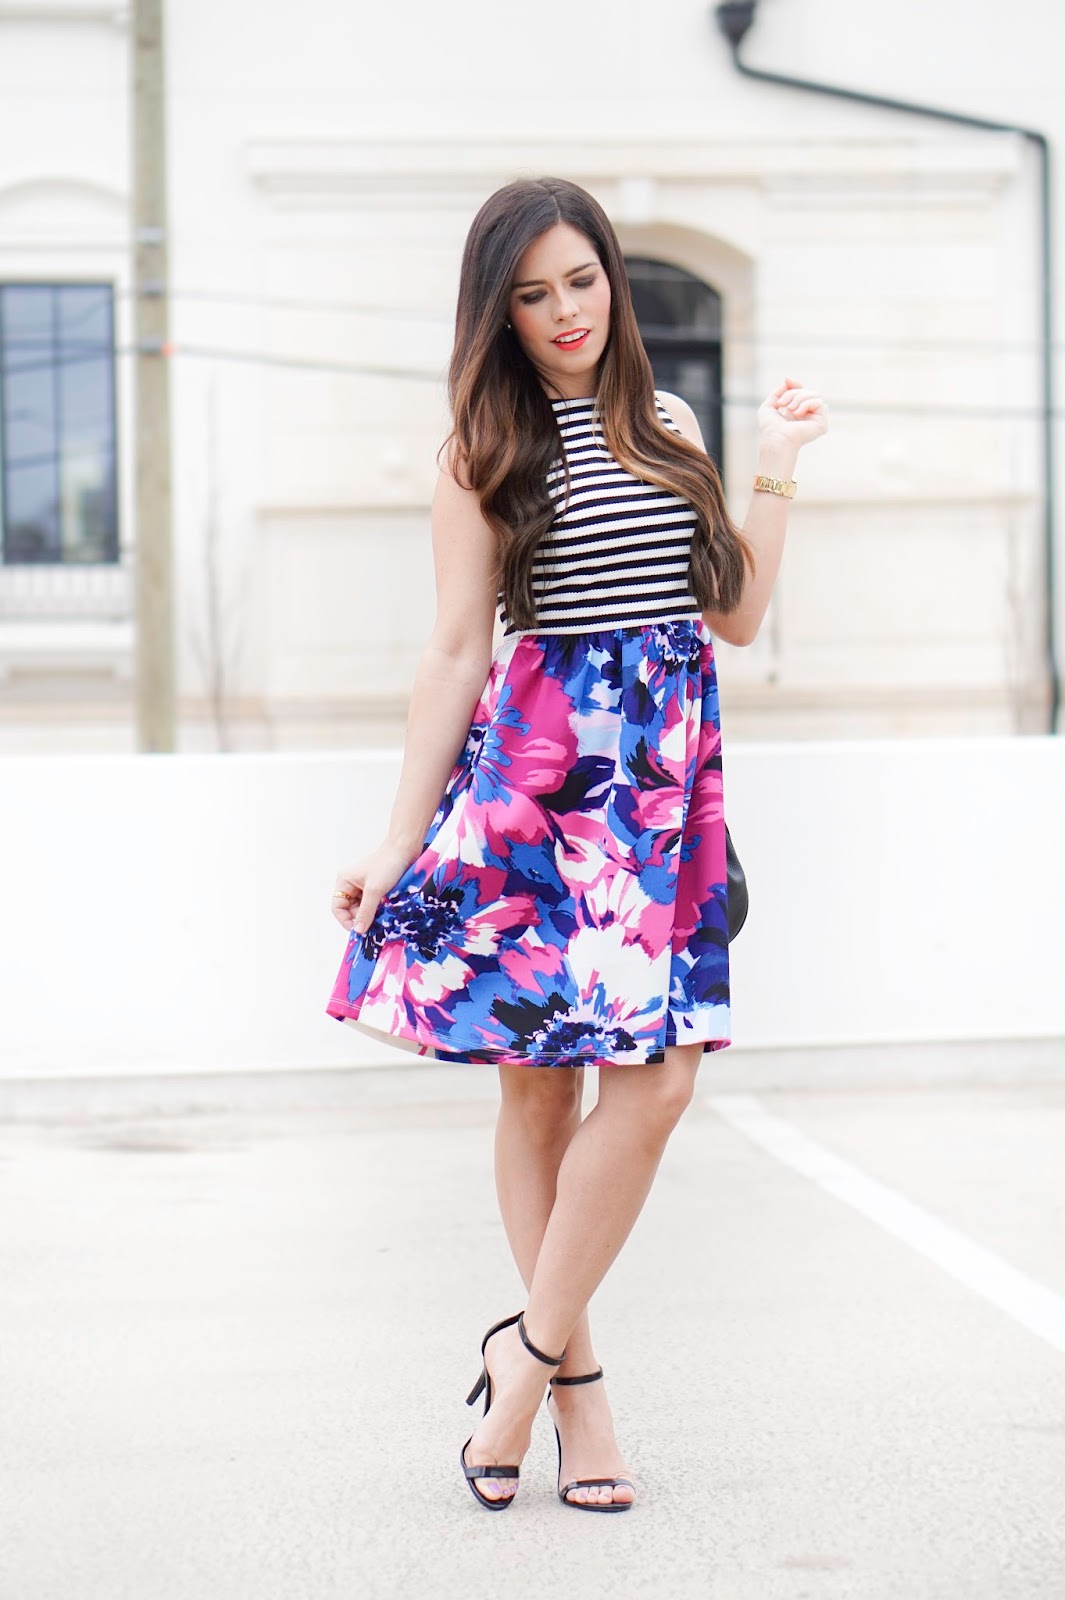 Striped Dress and Floral Heels - Style of Sam